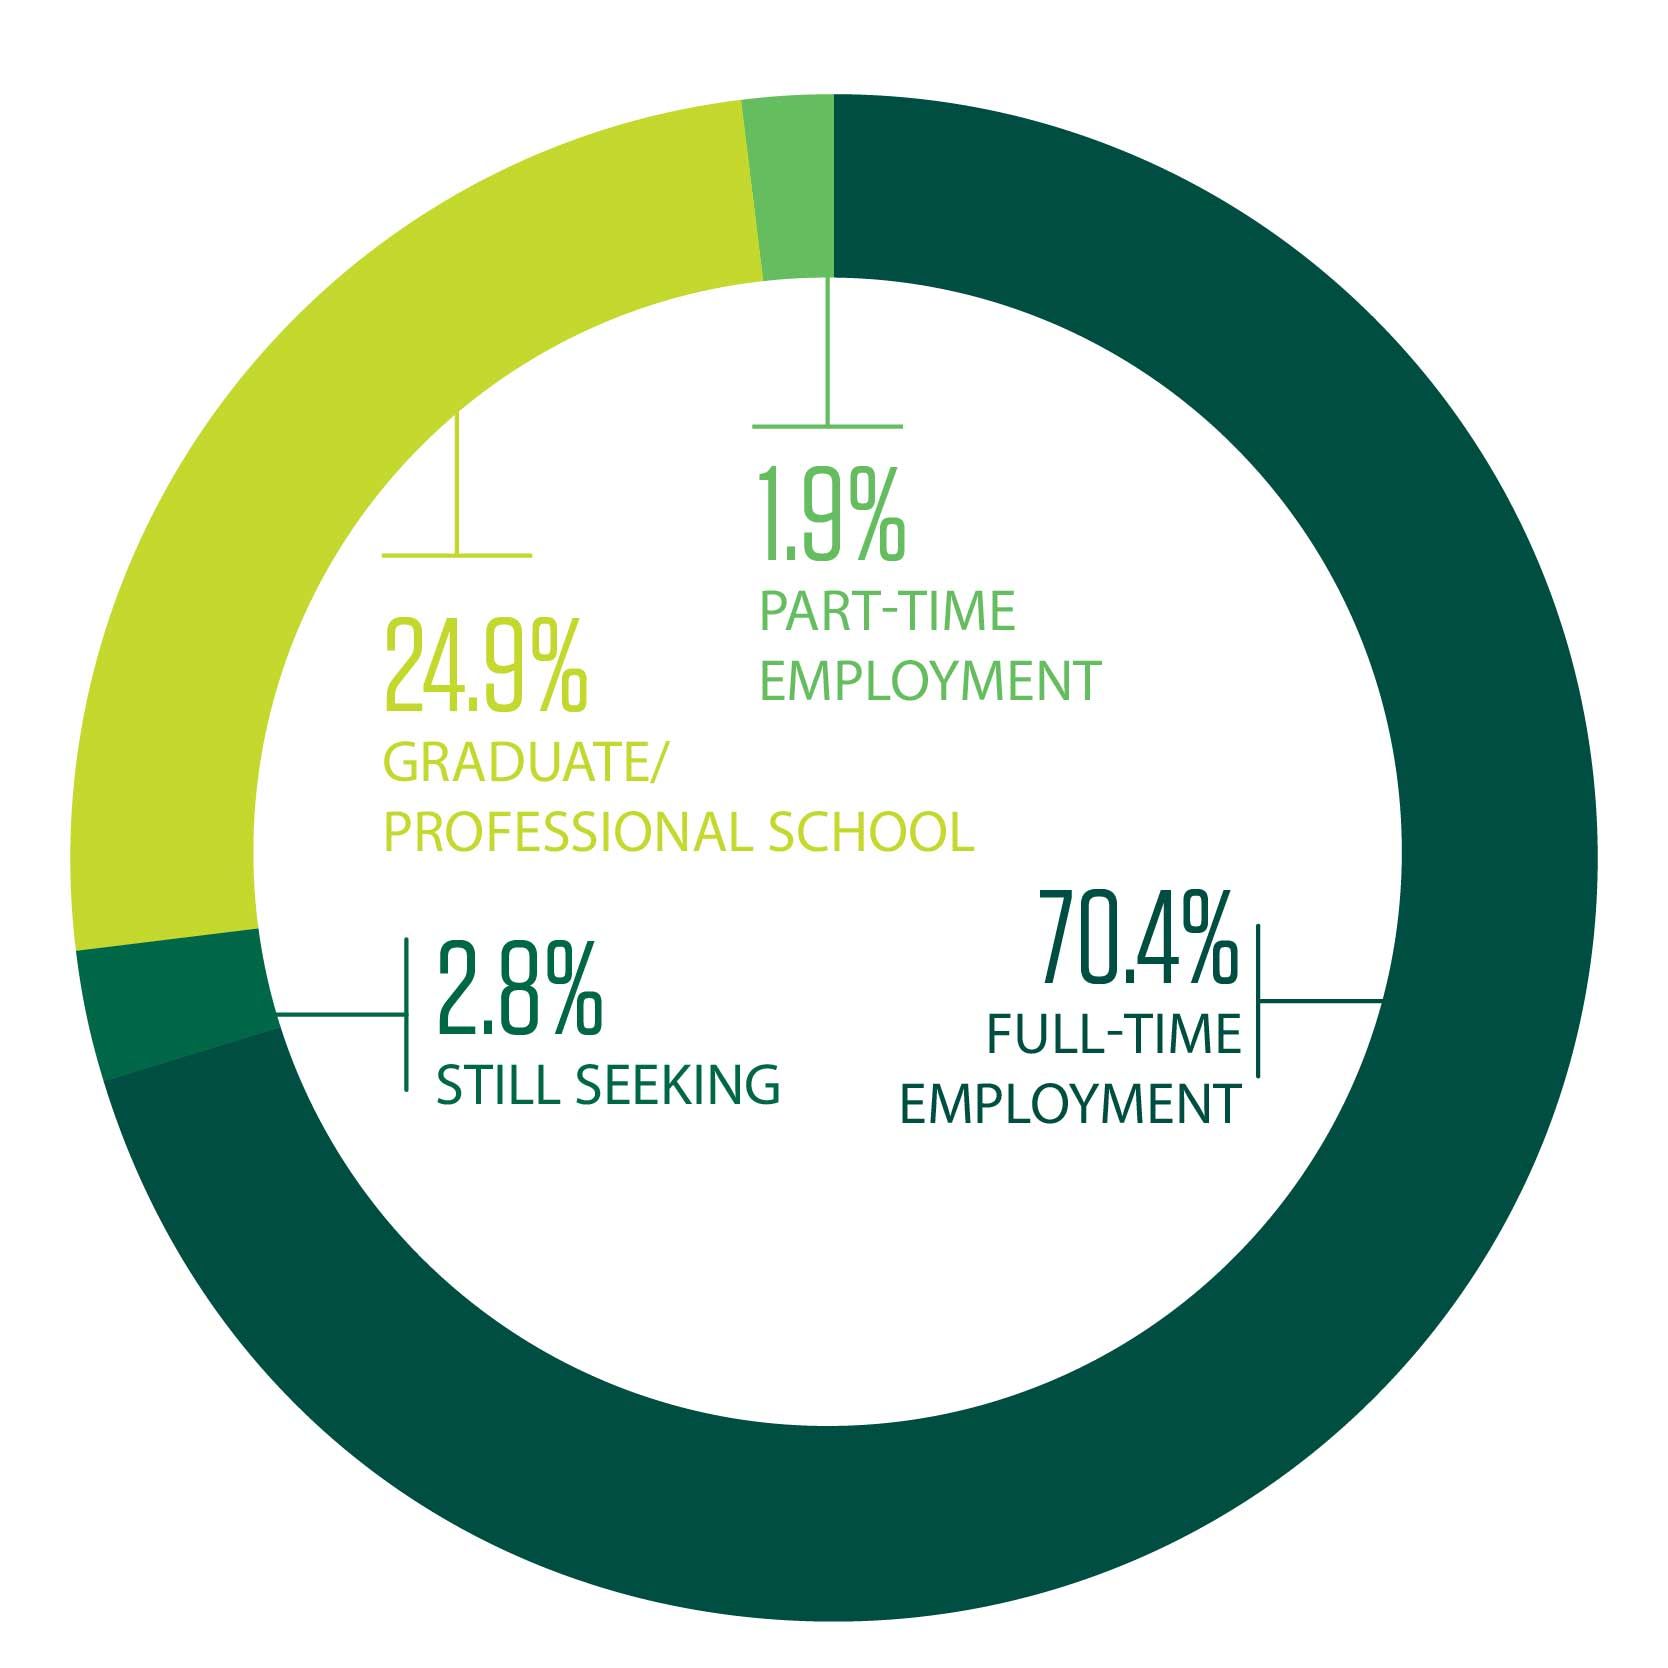 Survey Finds 97% of 2019 Graduates Employed or Continuing Education